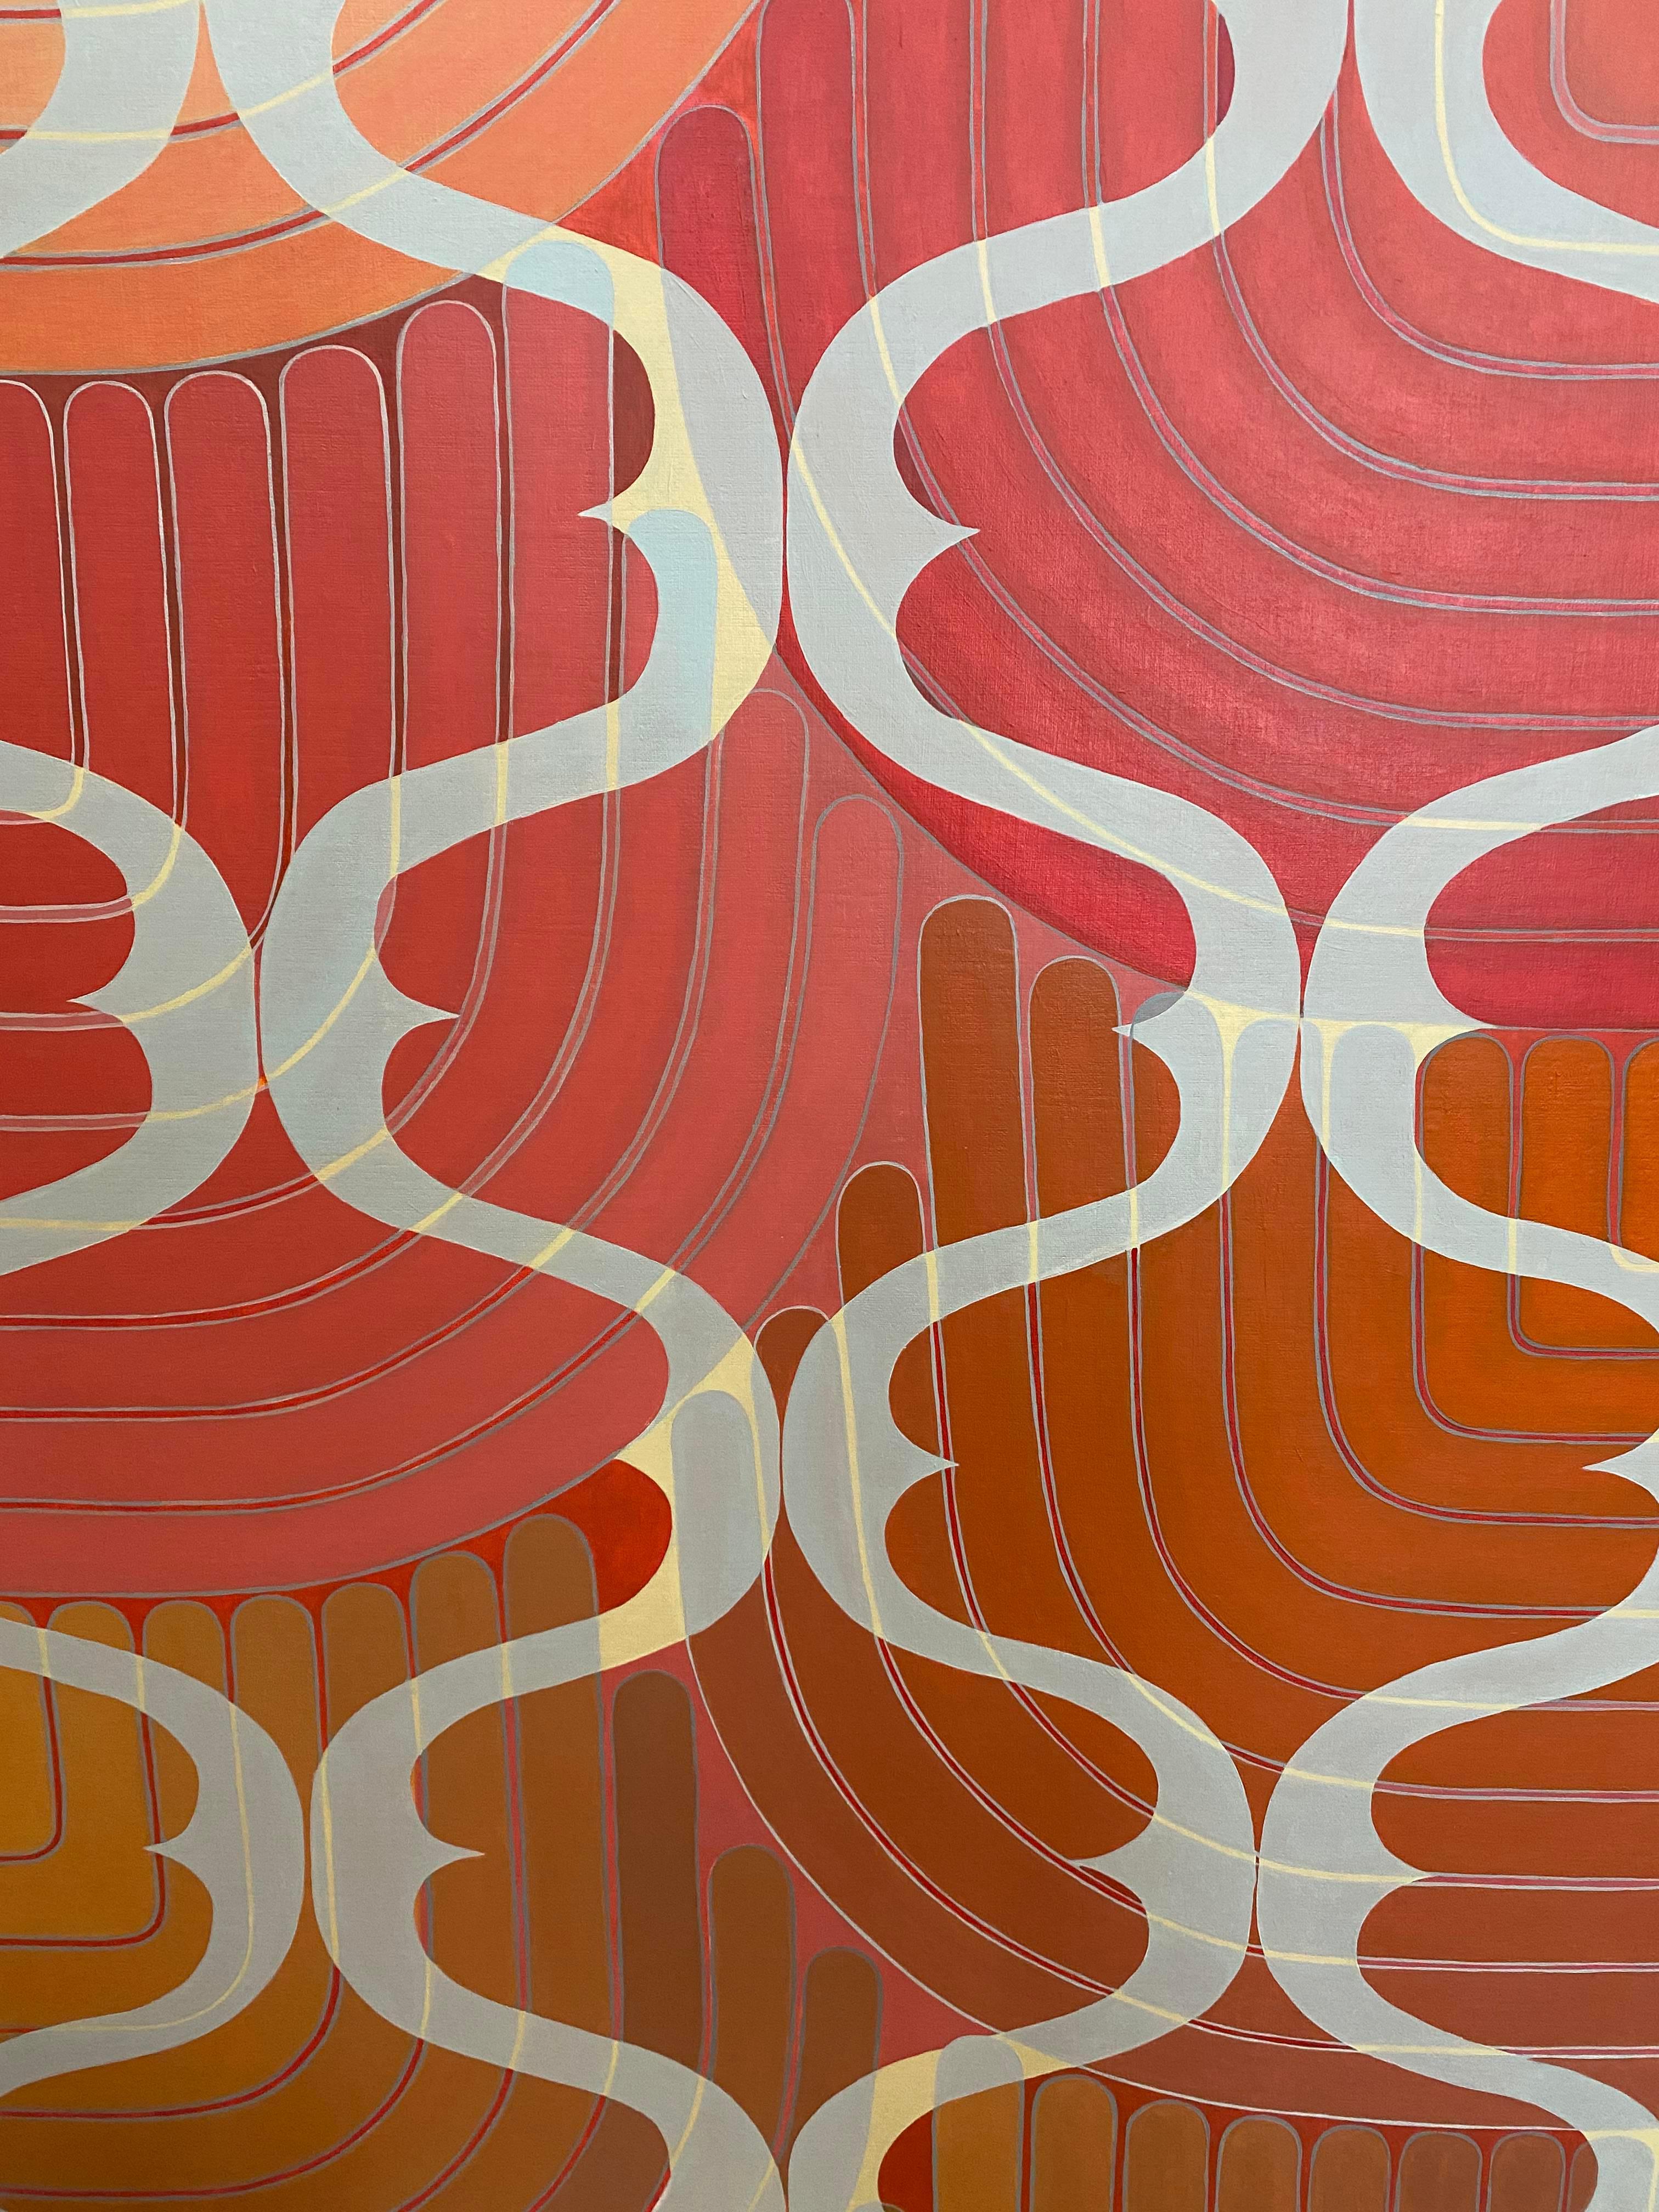 Drape, Coral, Dark Pink, Gray, Orange Geometric Abstract Curving Lines Pattern - Contemporary Painting by Jenny Kemp